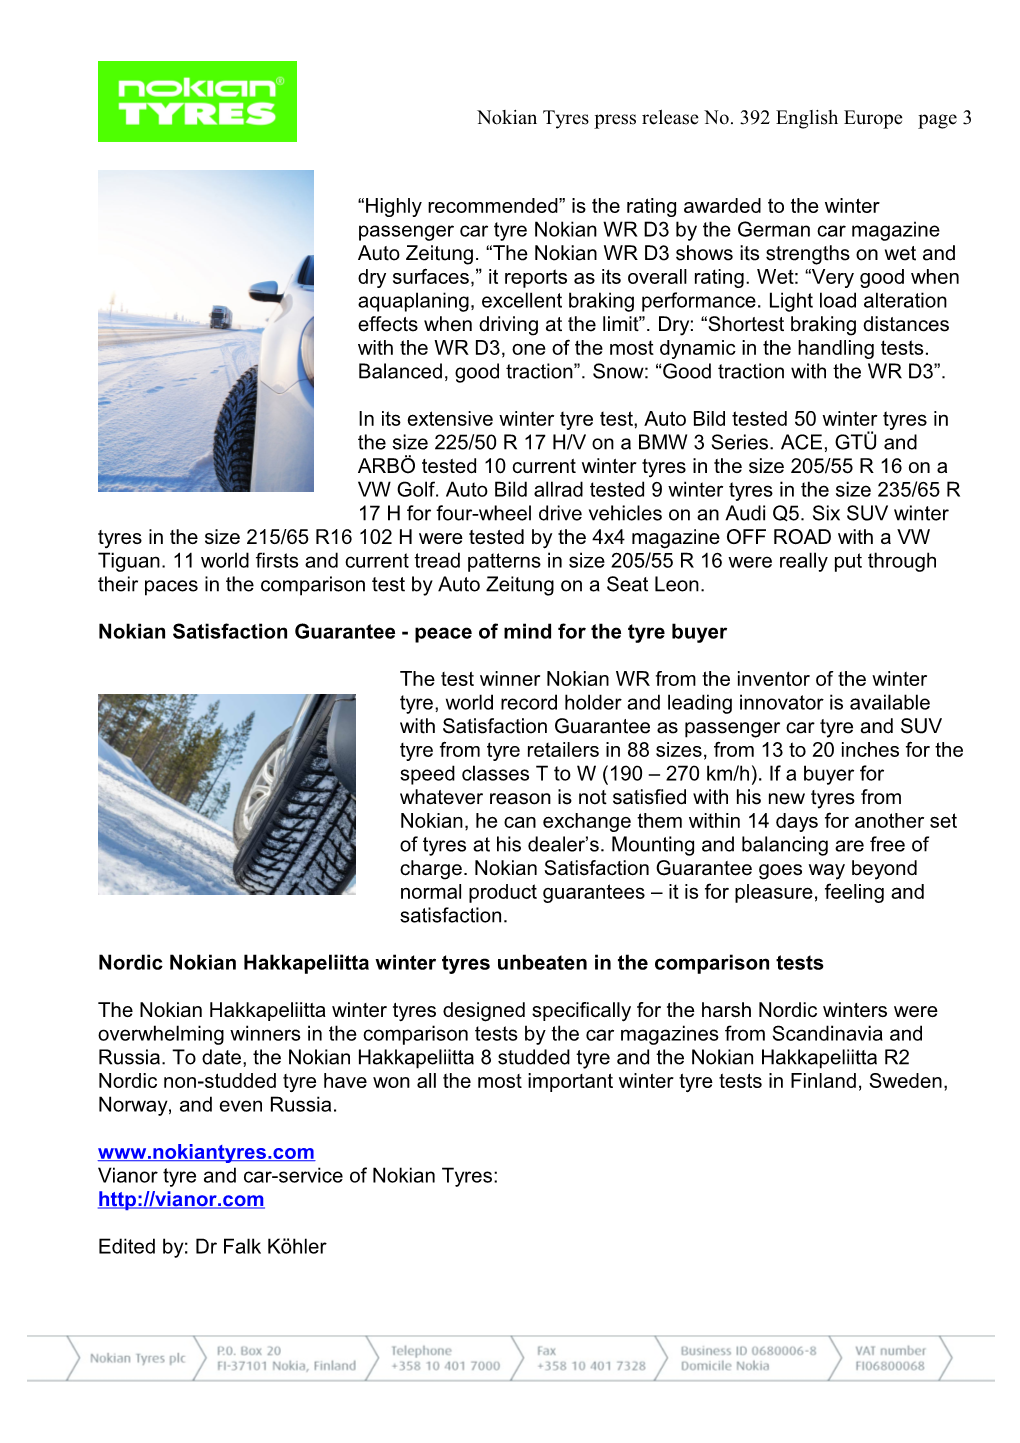 Nokian Tyres Press Release No. 392 English Europe Page 1